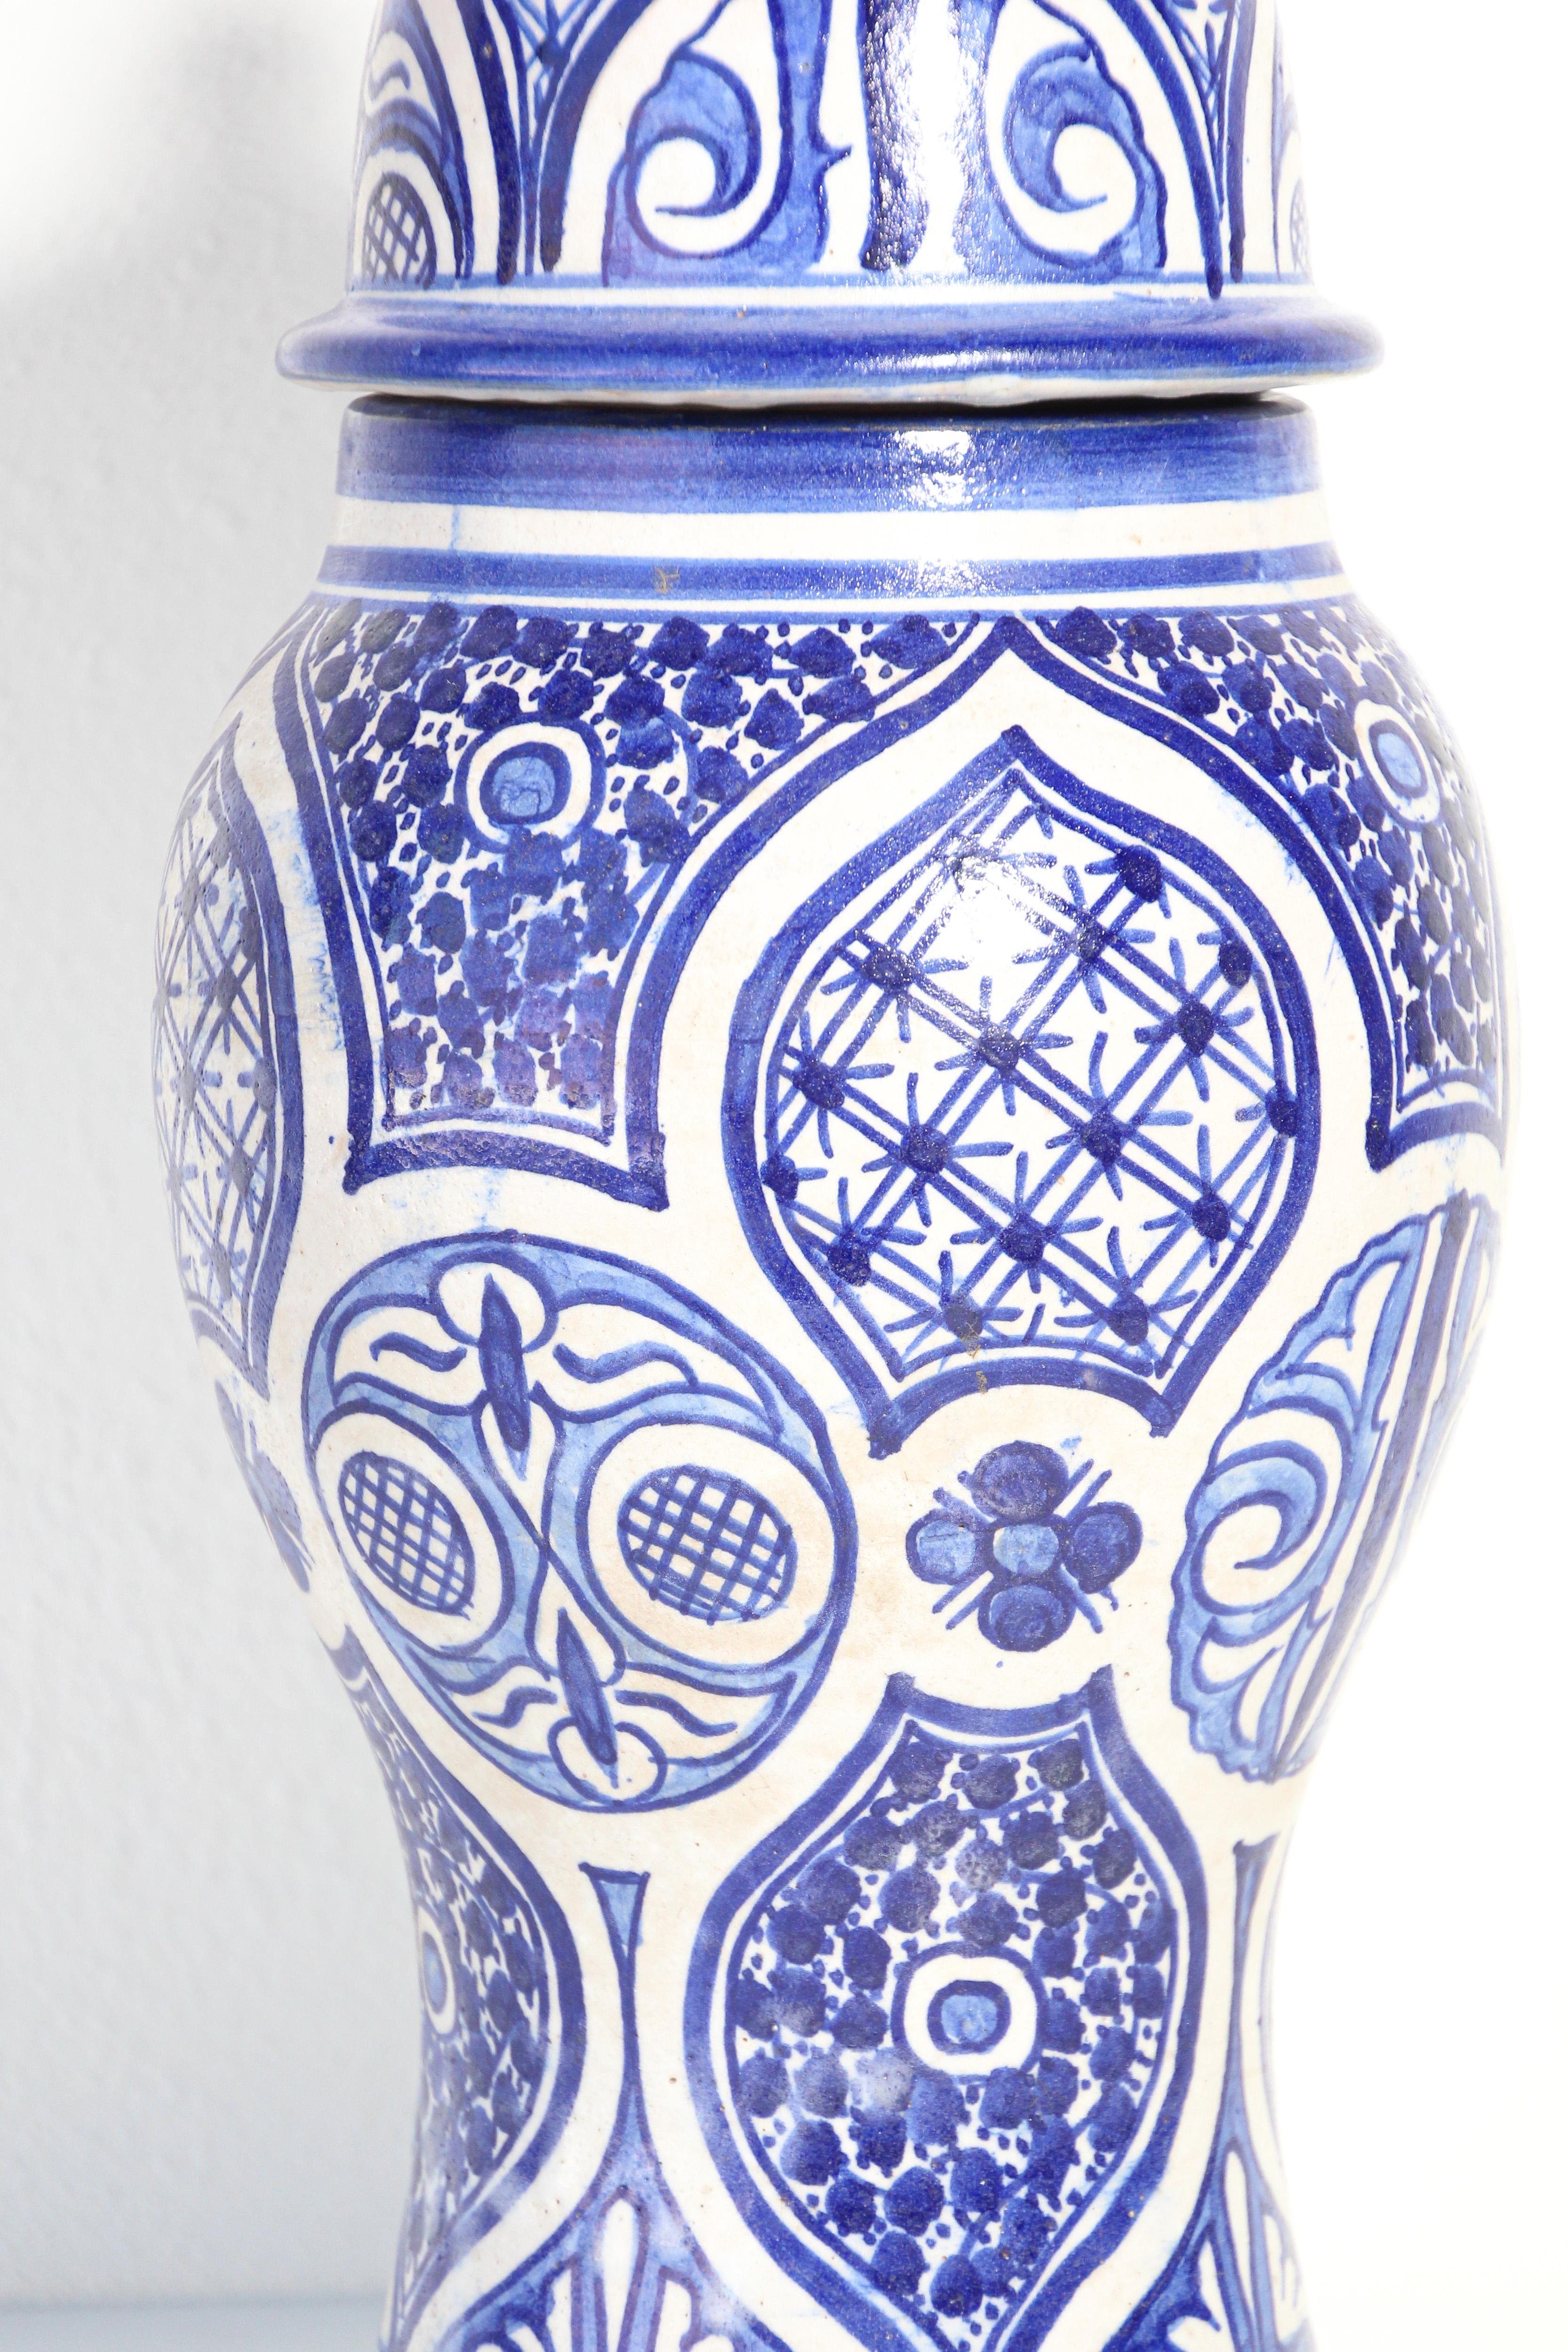 Decorative Moroccan glazed ceramic jar with lid from Fez.
Moorish style decorative ceramic urn handcrafted and hand painted floral design.
Royal blue and ivory color Moorish design.
Size: 16 in. height x 7 in. diameter.
Great to use as ceramic